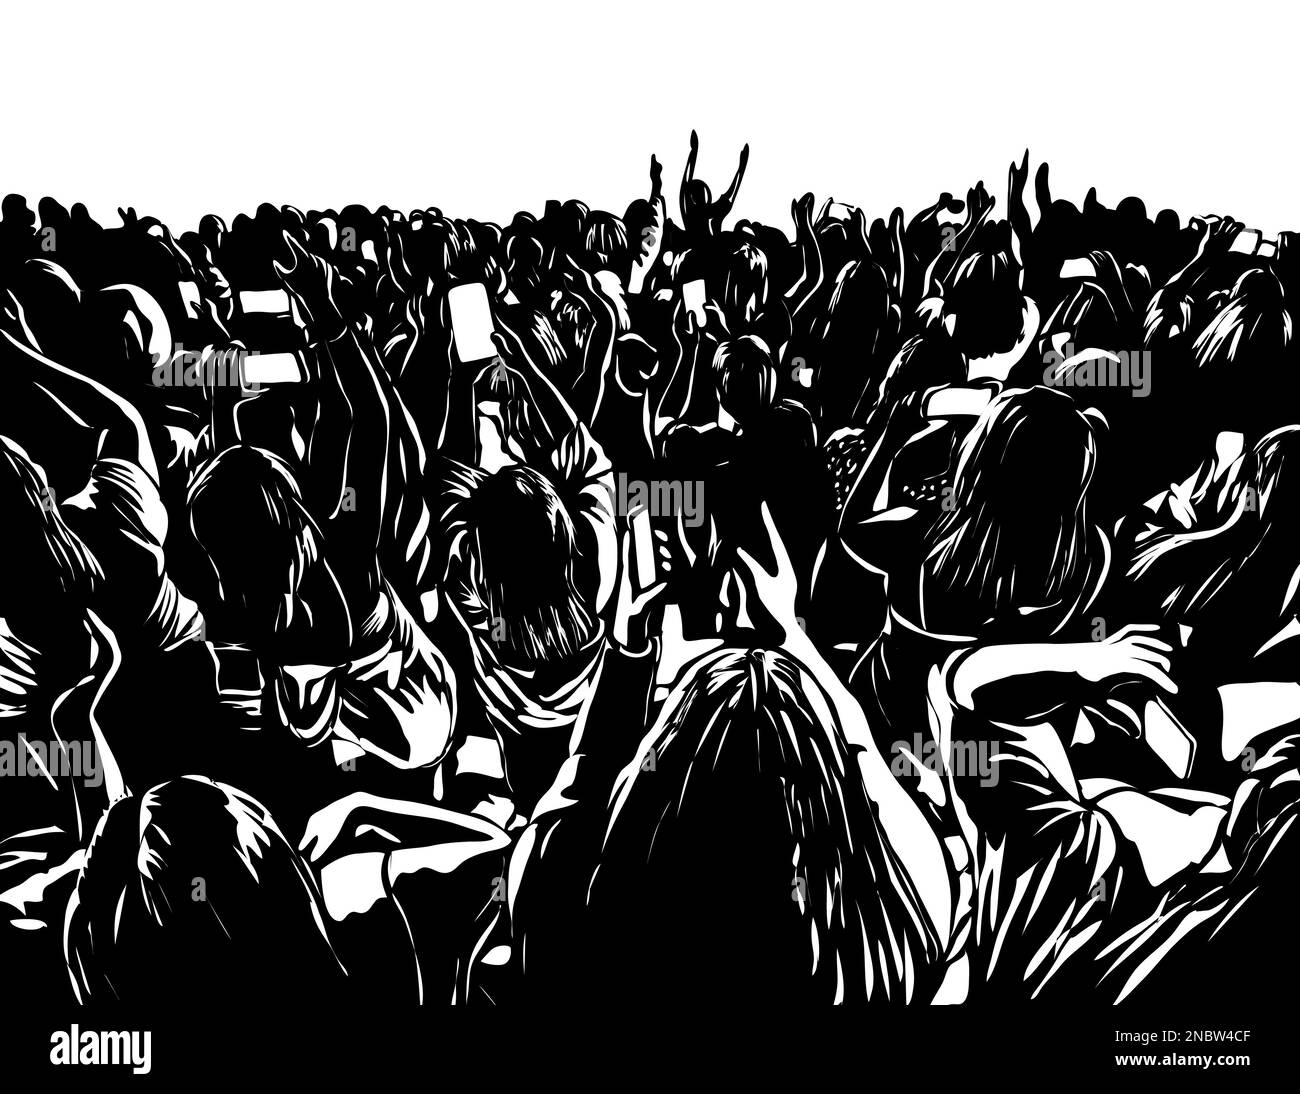 Retro woodcut style illustration of a crowd of people in an event watching a concert holding mobile phones on isolated background in black and white. Stock Photo